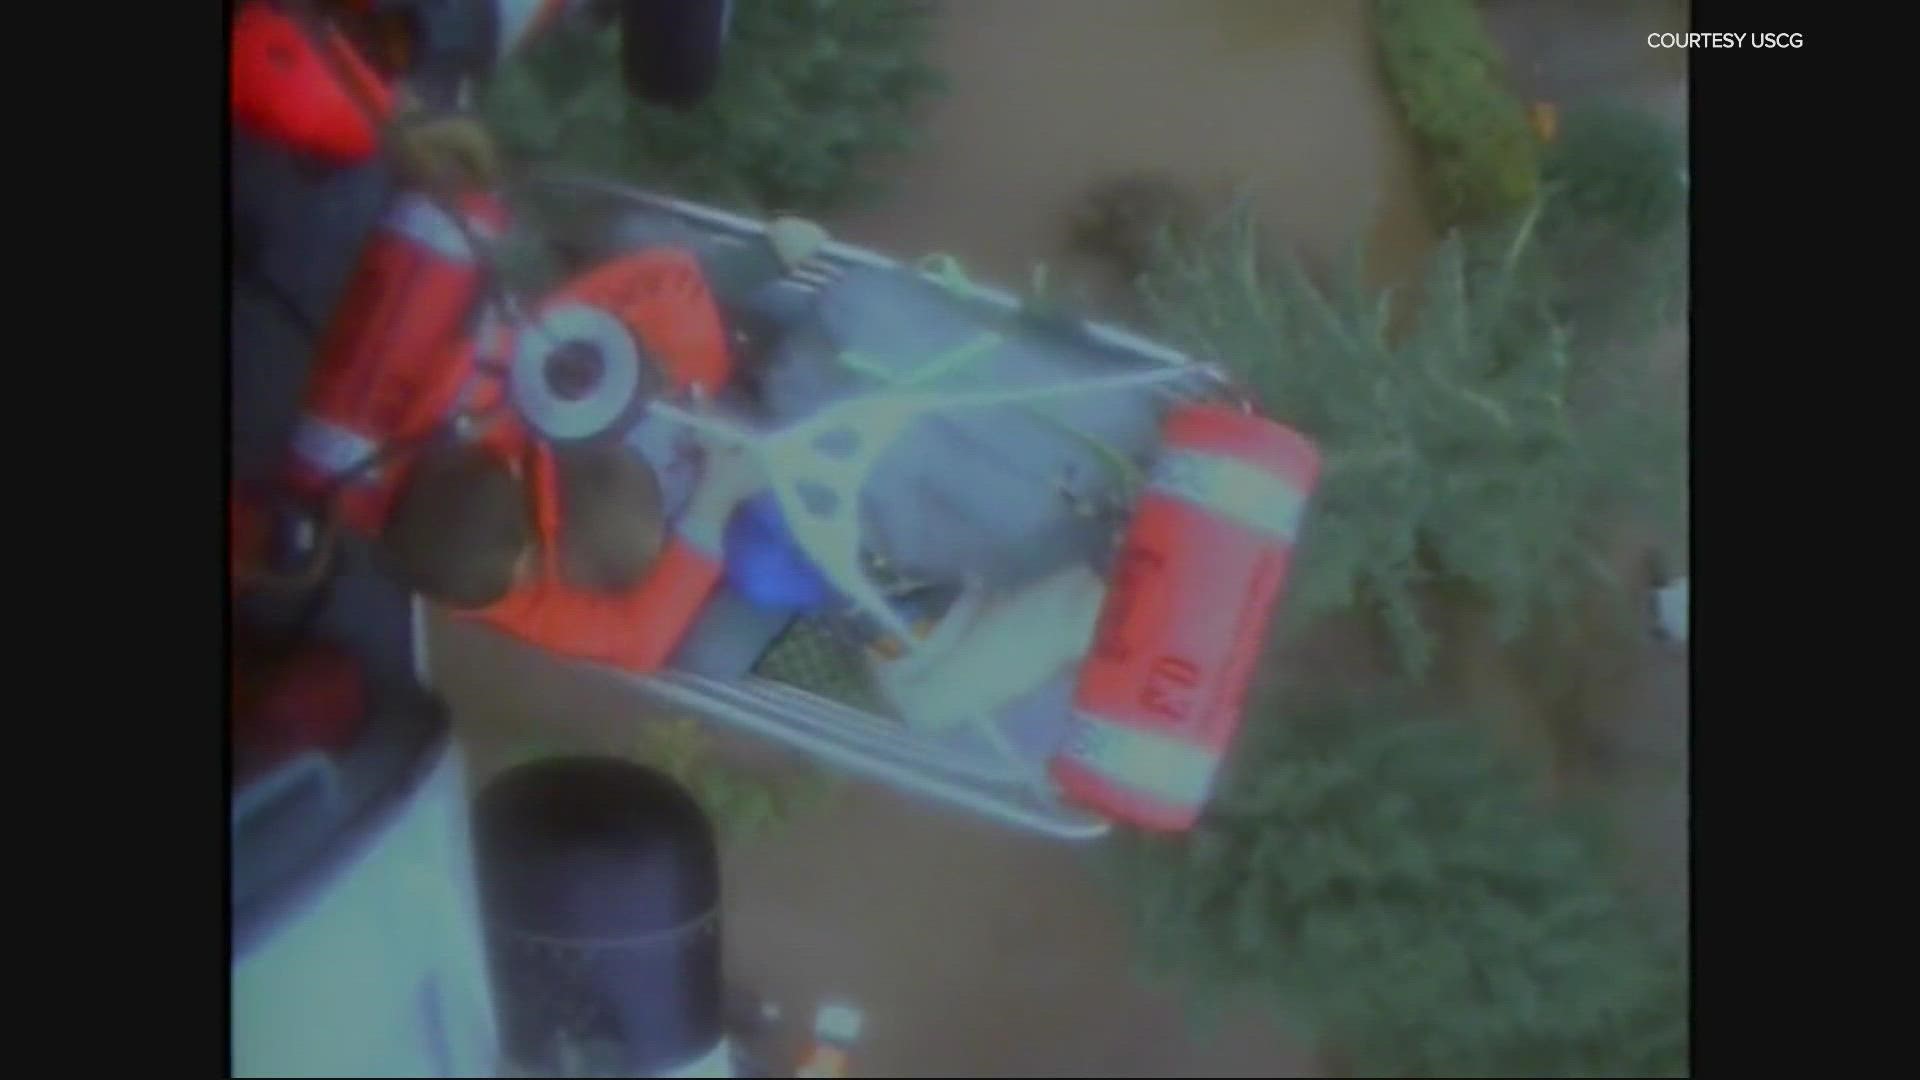 A U.S. Coast Guard helicopter crew rescued 10 people in Forks, Washington who had been trapped on rooftops by flooding over the weekend.